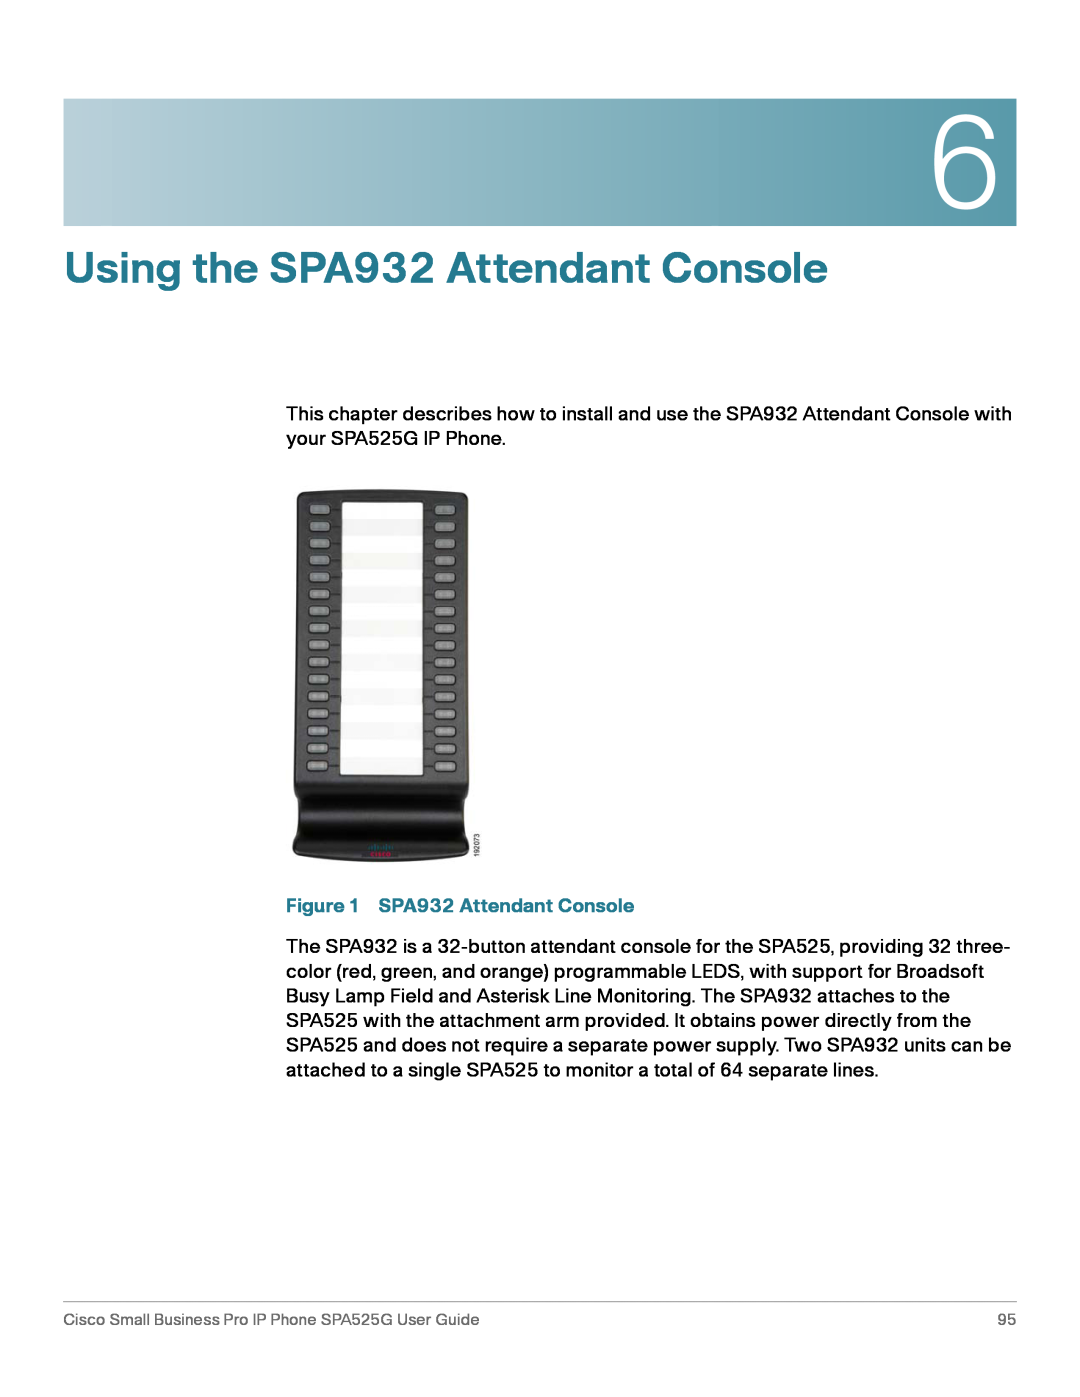 Cisco Systems SPA525G manual Using the SPA932 Attendant Console 